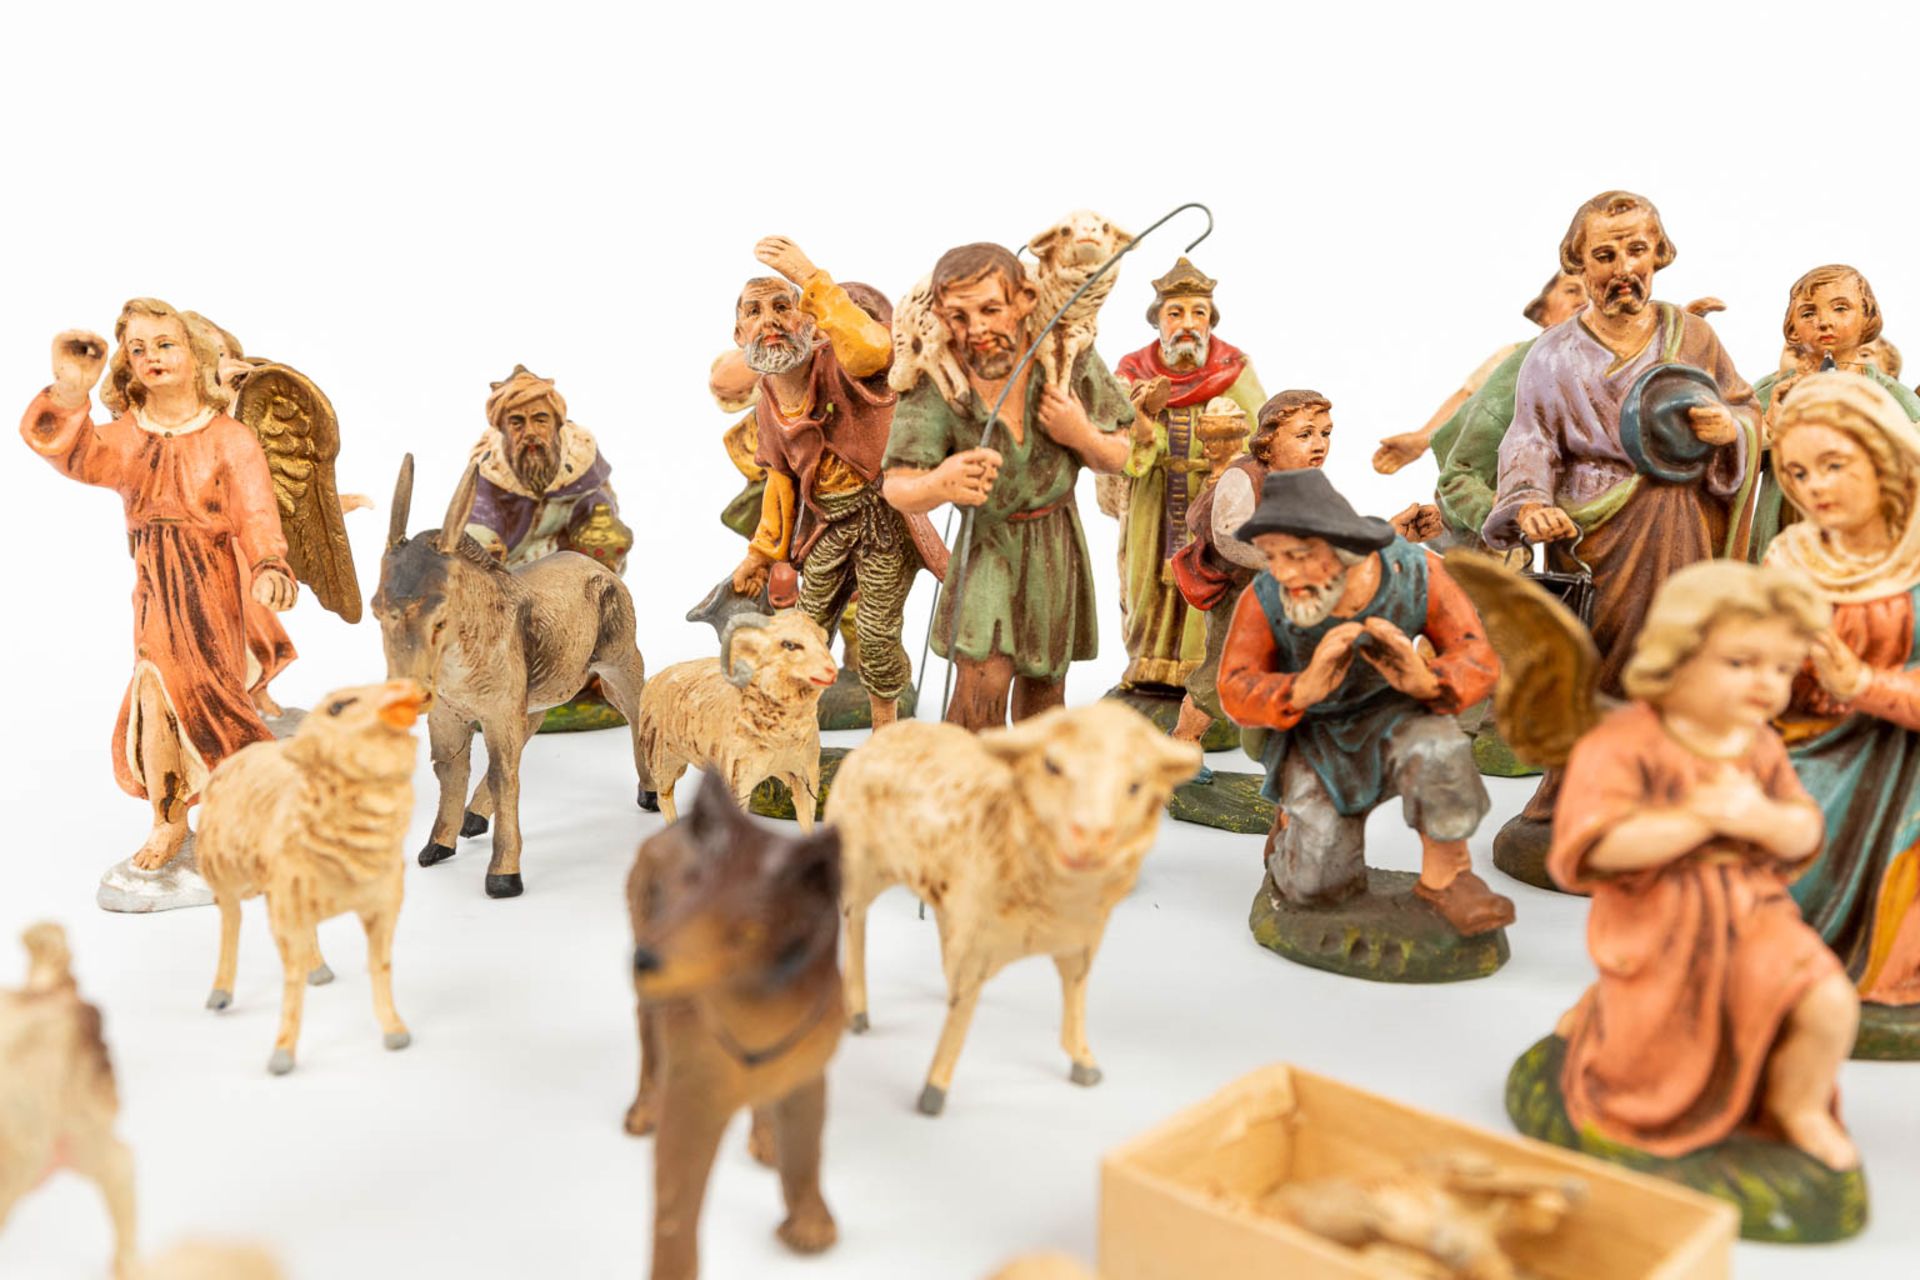 A large and extended Nativity scene with figurines and animals made of papier maché. - Image 7 of 20